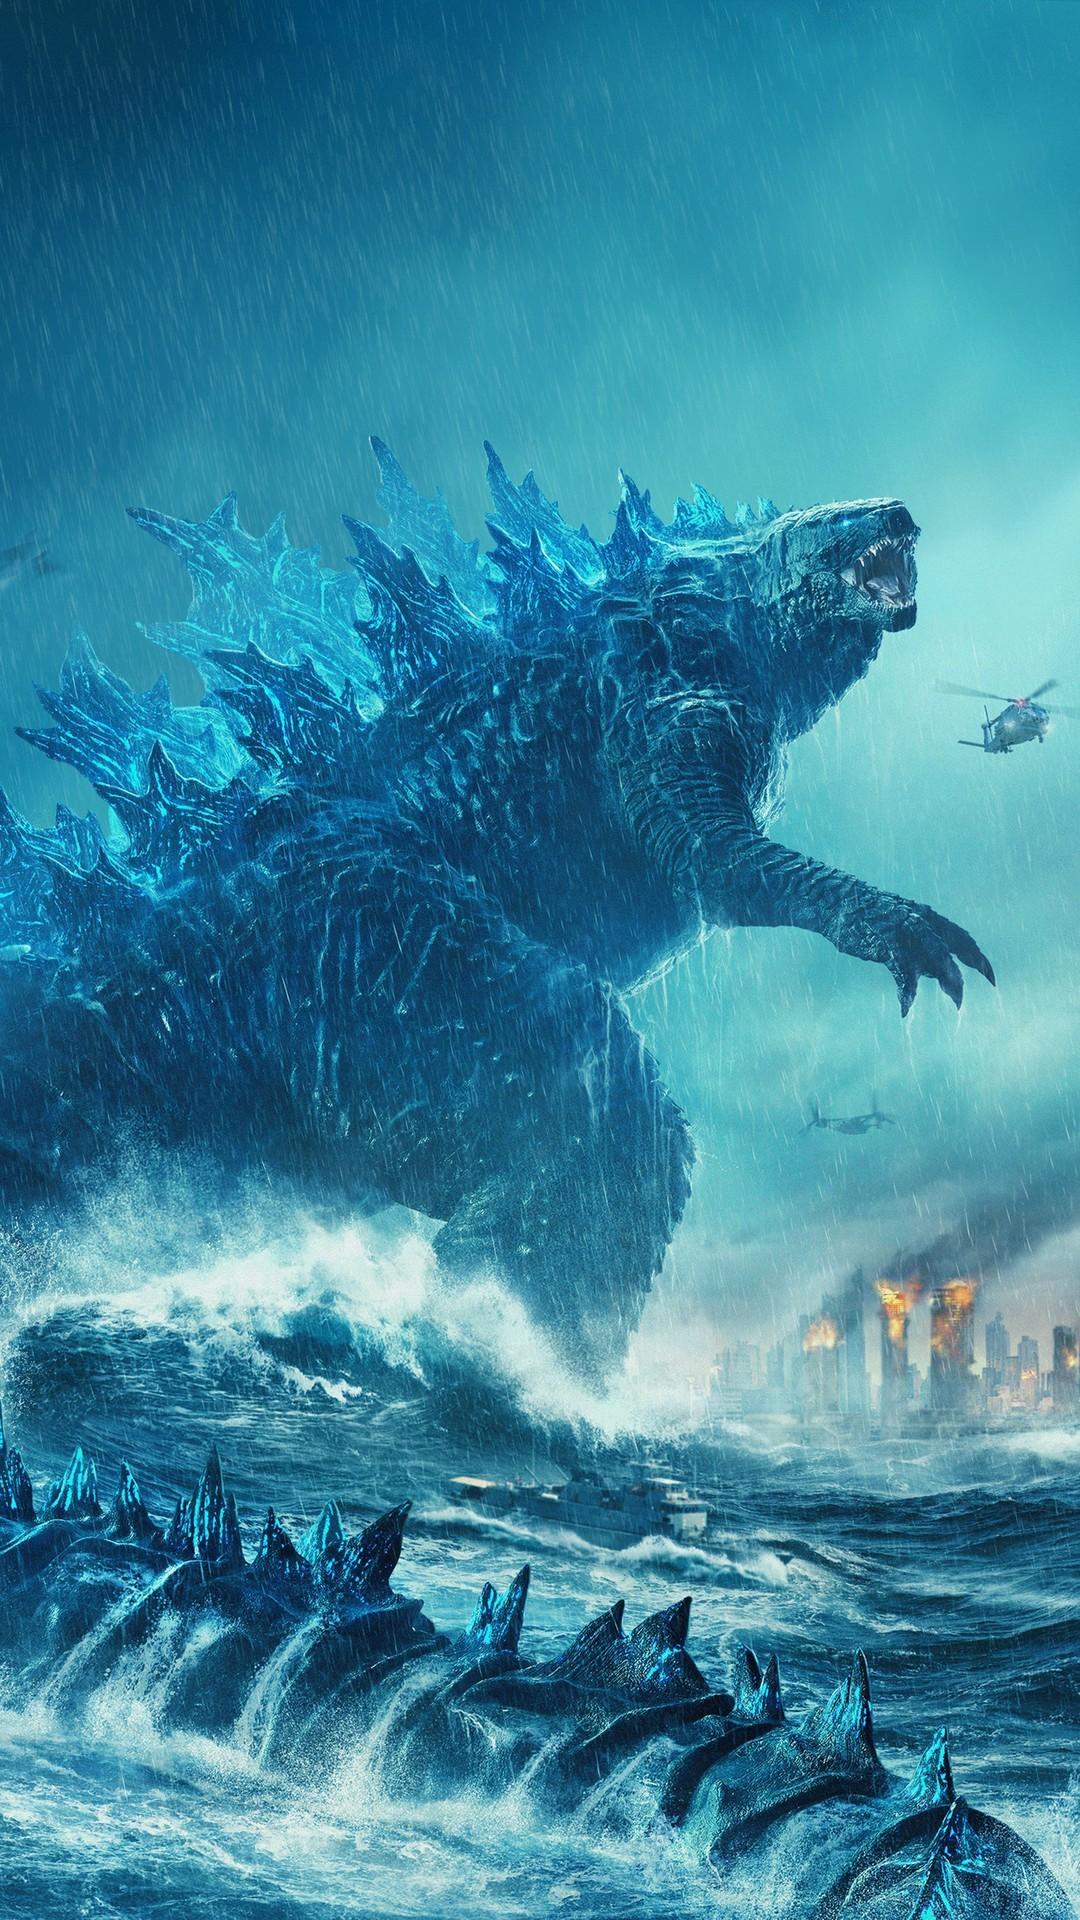 Godzilla King of the Monsters Wallpaper For iPhone 3D iPhone Wallpaper